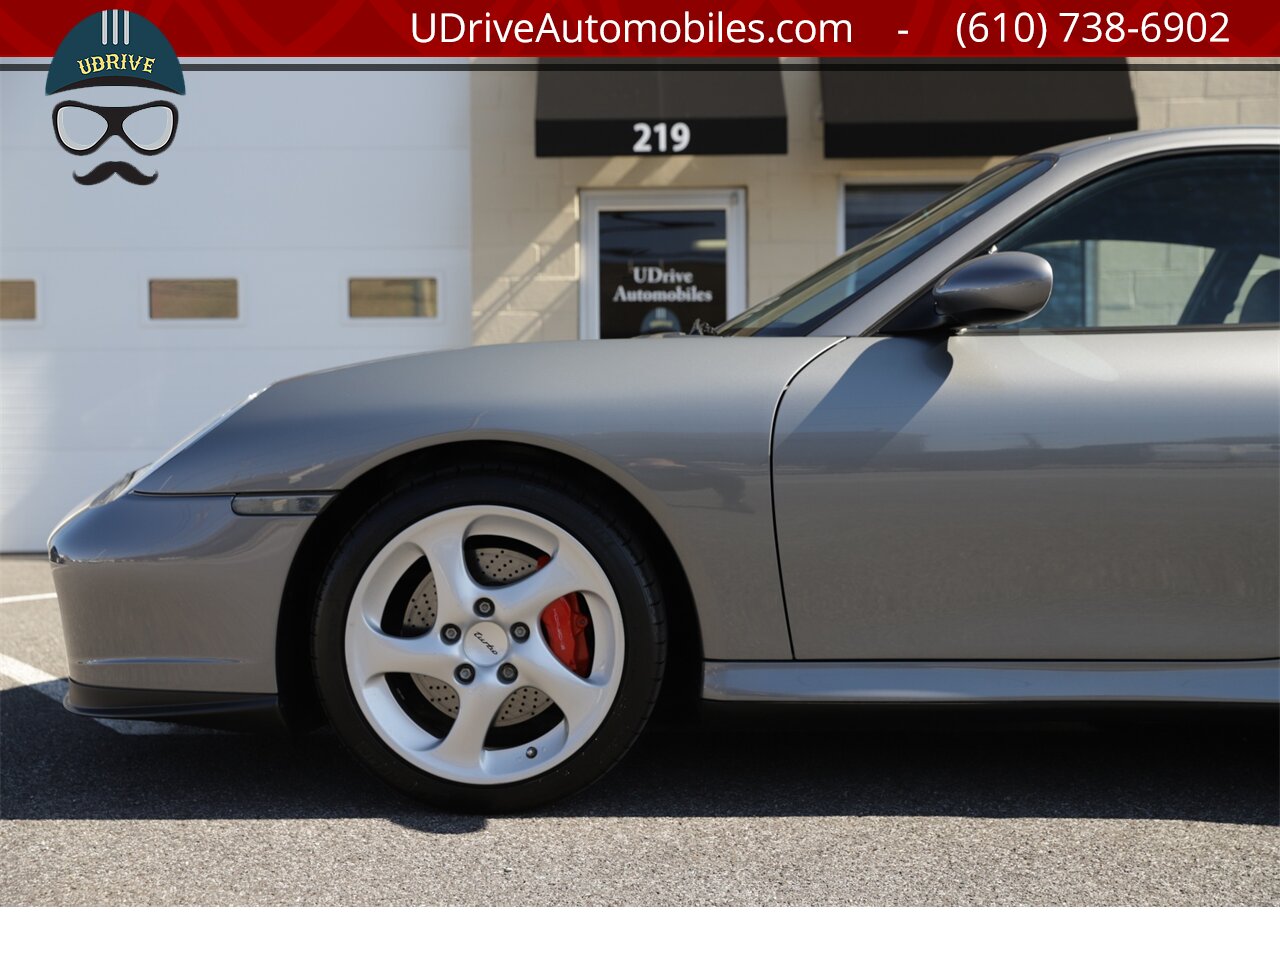 2003 Porsche 911 996 Turbo X50 Power Kit 6 Speed Seal Grey  over Black Leather - Photo 9 - West Chester, PA 19382